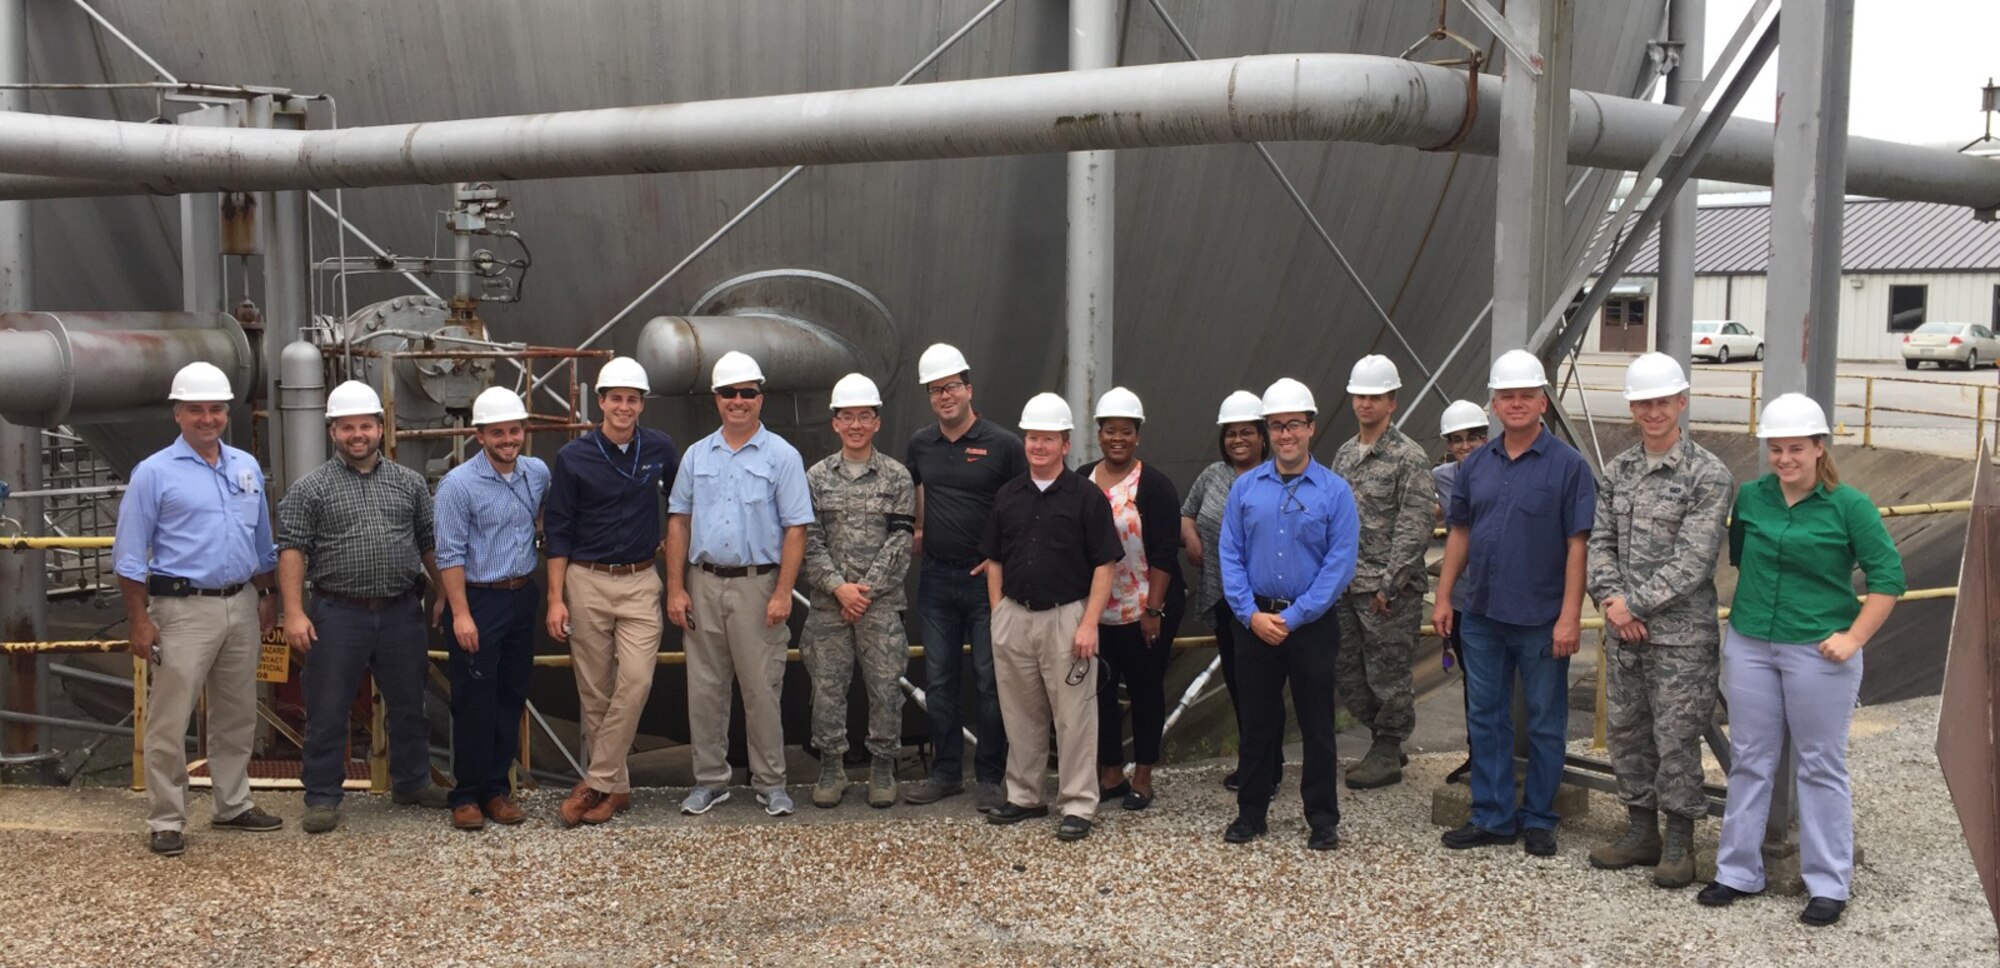 Junior Force Council groups from Wright-Patterson AFB and Edwards AFB visit AEDC. The groups, affiliated with the Air Force Research Laboratory, visited in late August to view AEDC processes and procedures and share ideas and best practices. (Courtesy photo)